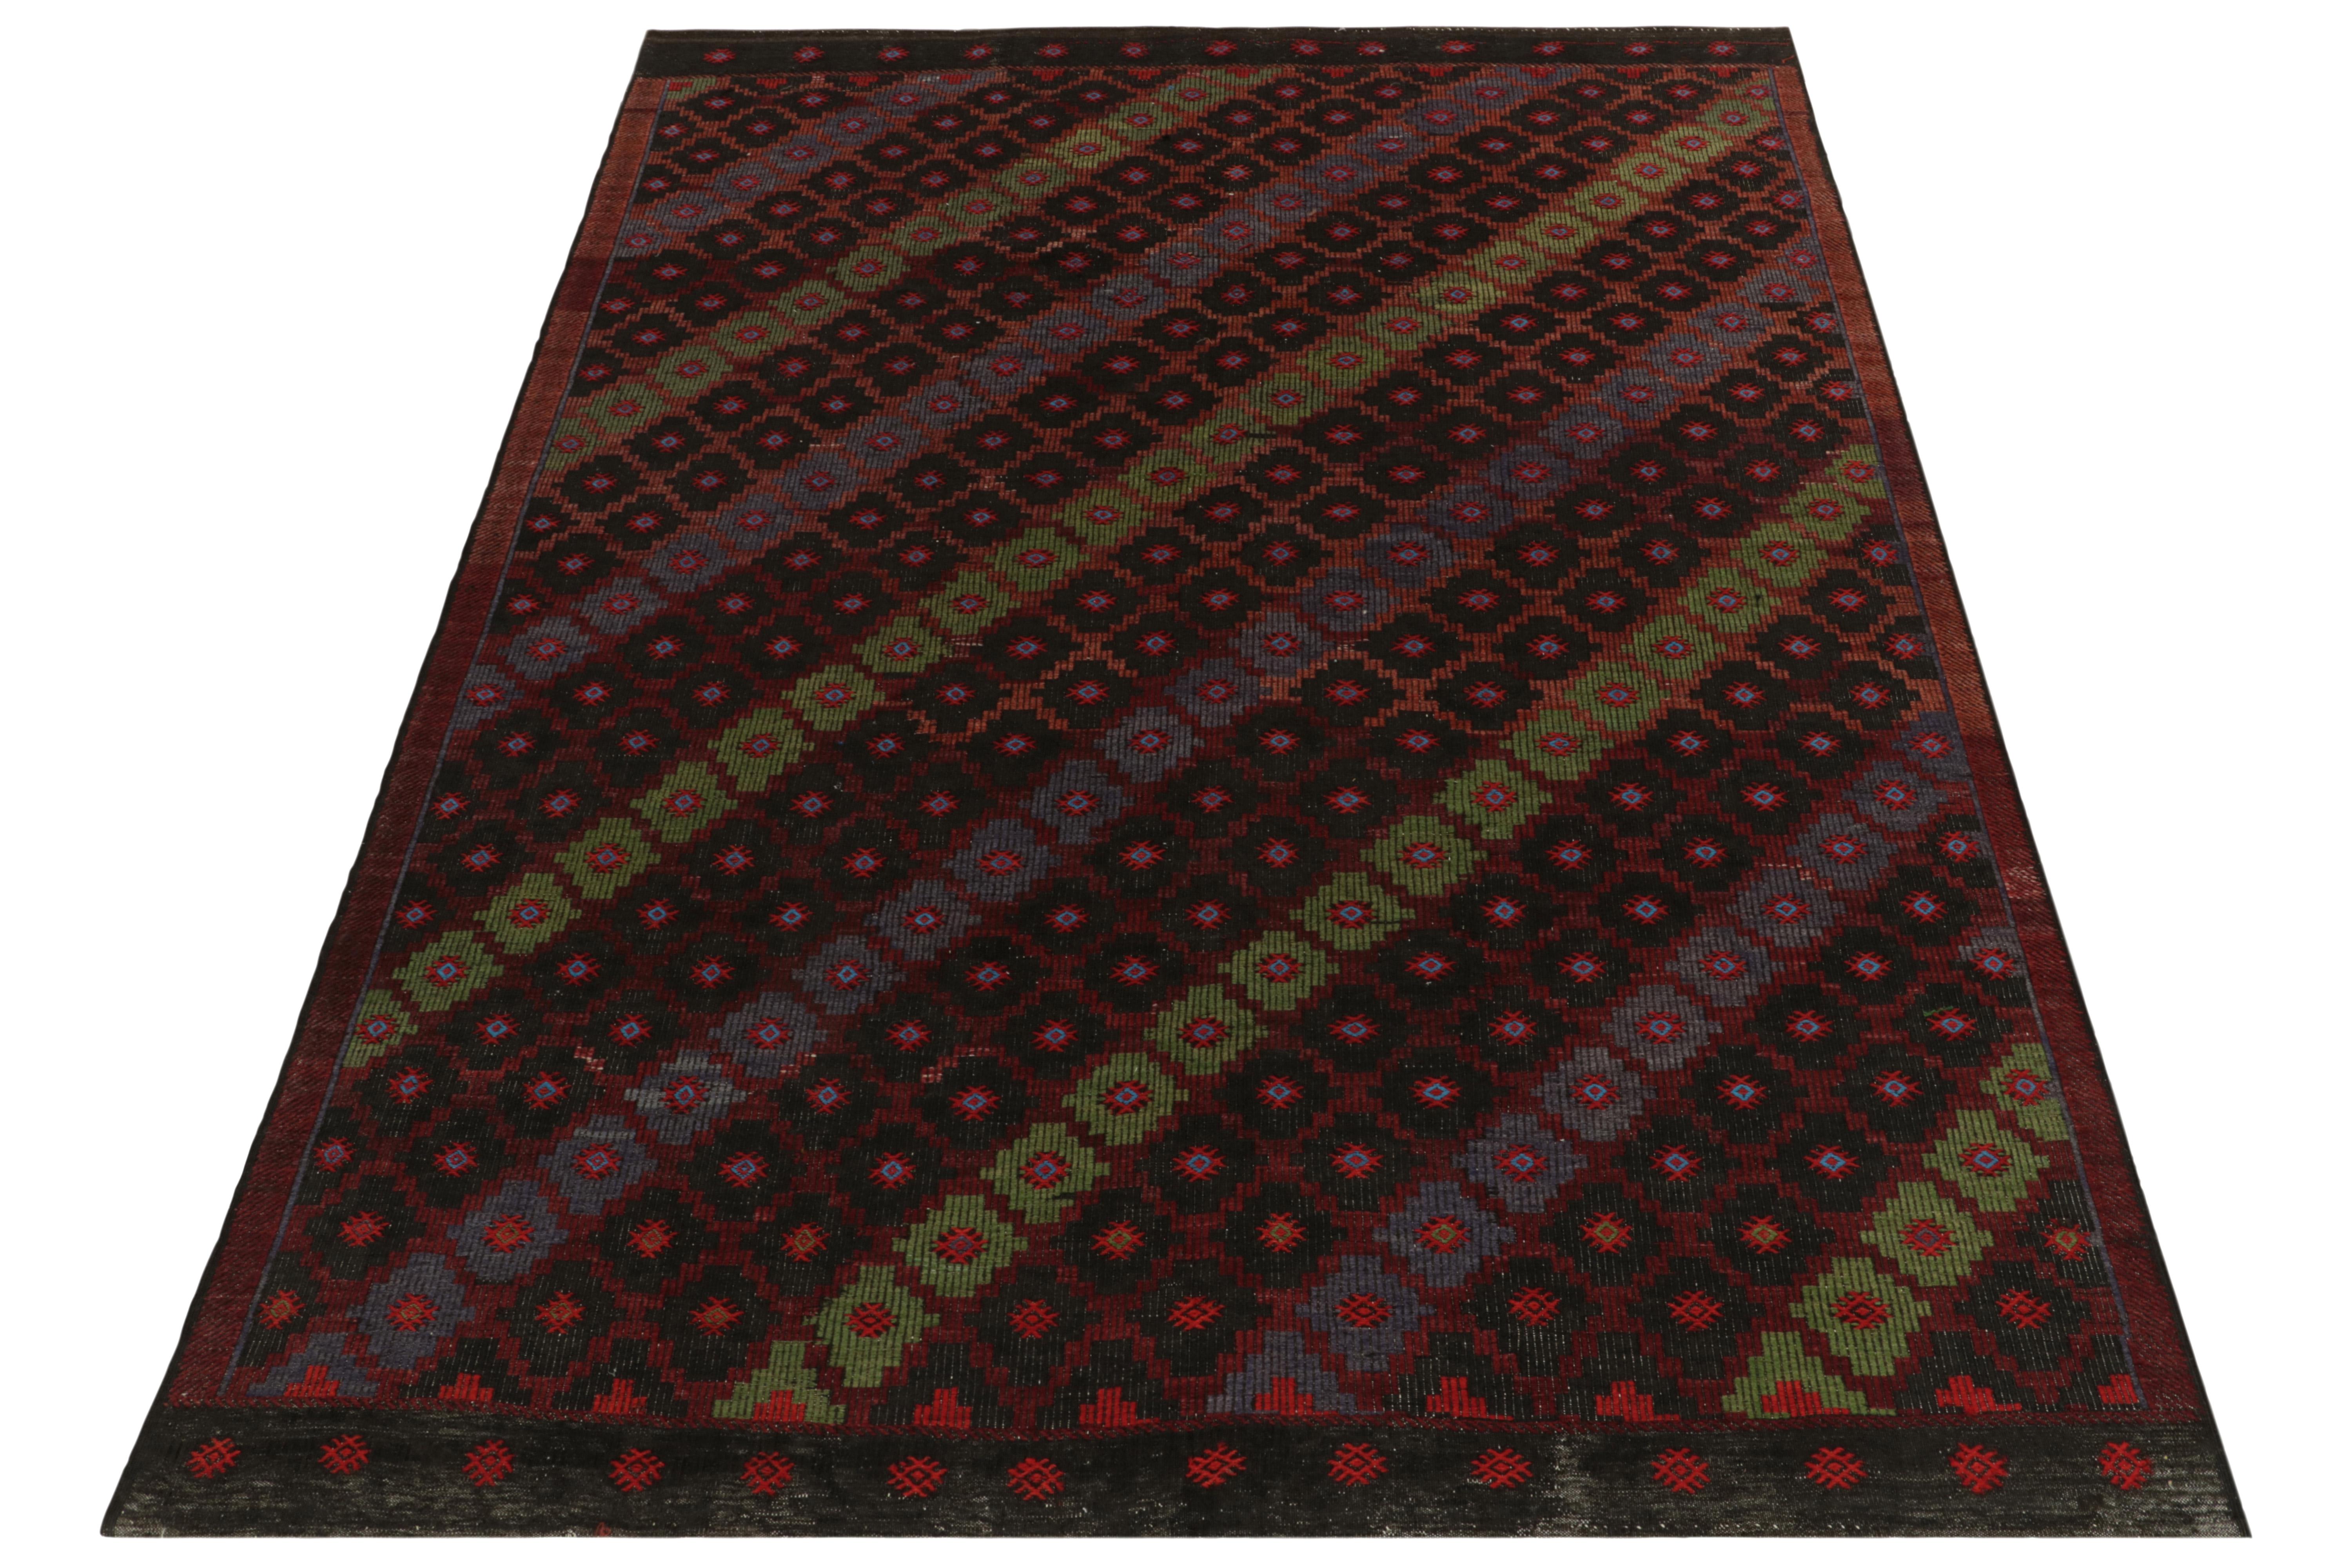 Connoting the renowned Kurdish style, this vintage 8x11 Cecim kilim rug remarks prestigious new curation in our flatweaves. This vintage mid-century rug features an embroidered lattice pattern manifesting as a careful diagonal design alternating in